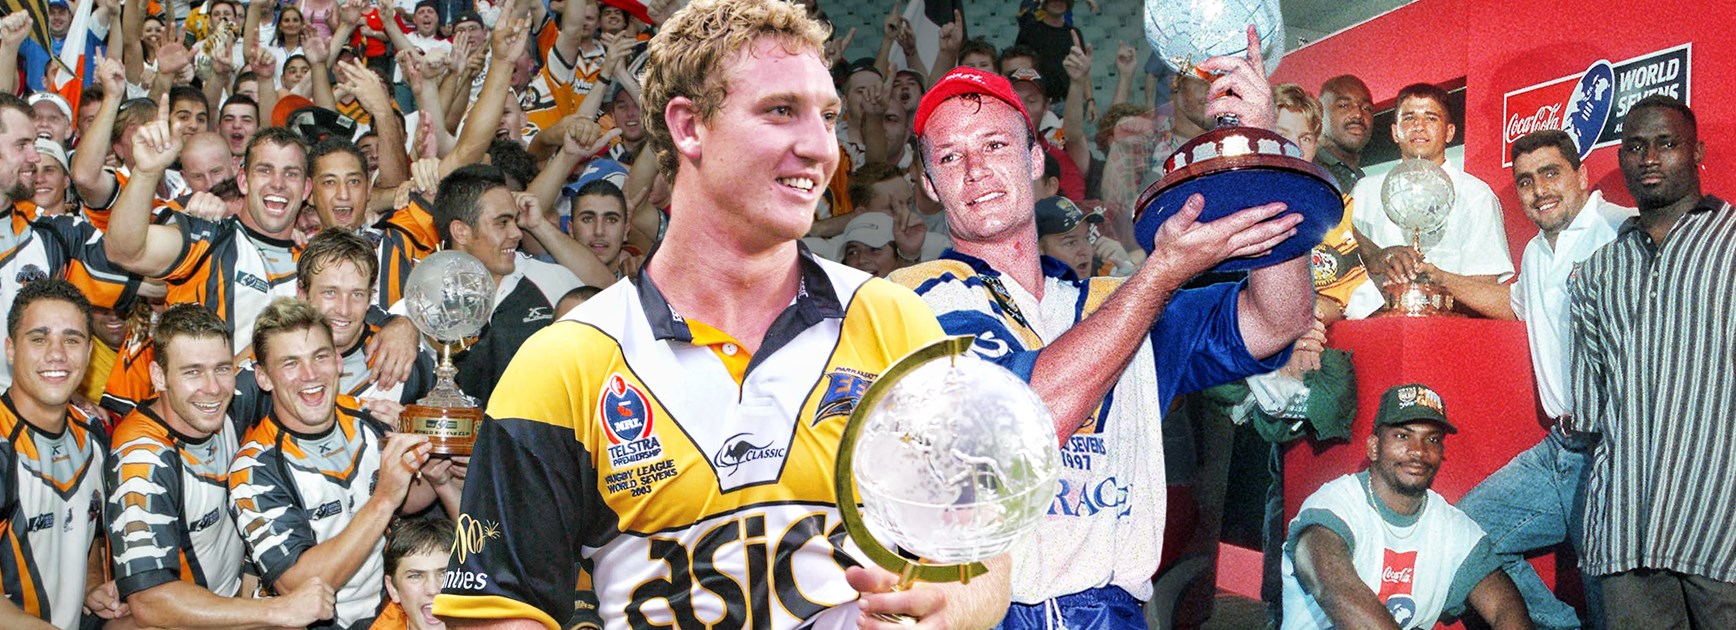 From Sevens to Nines via Super League: evolution of the short form